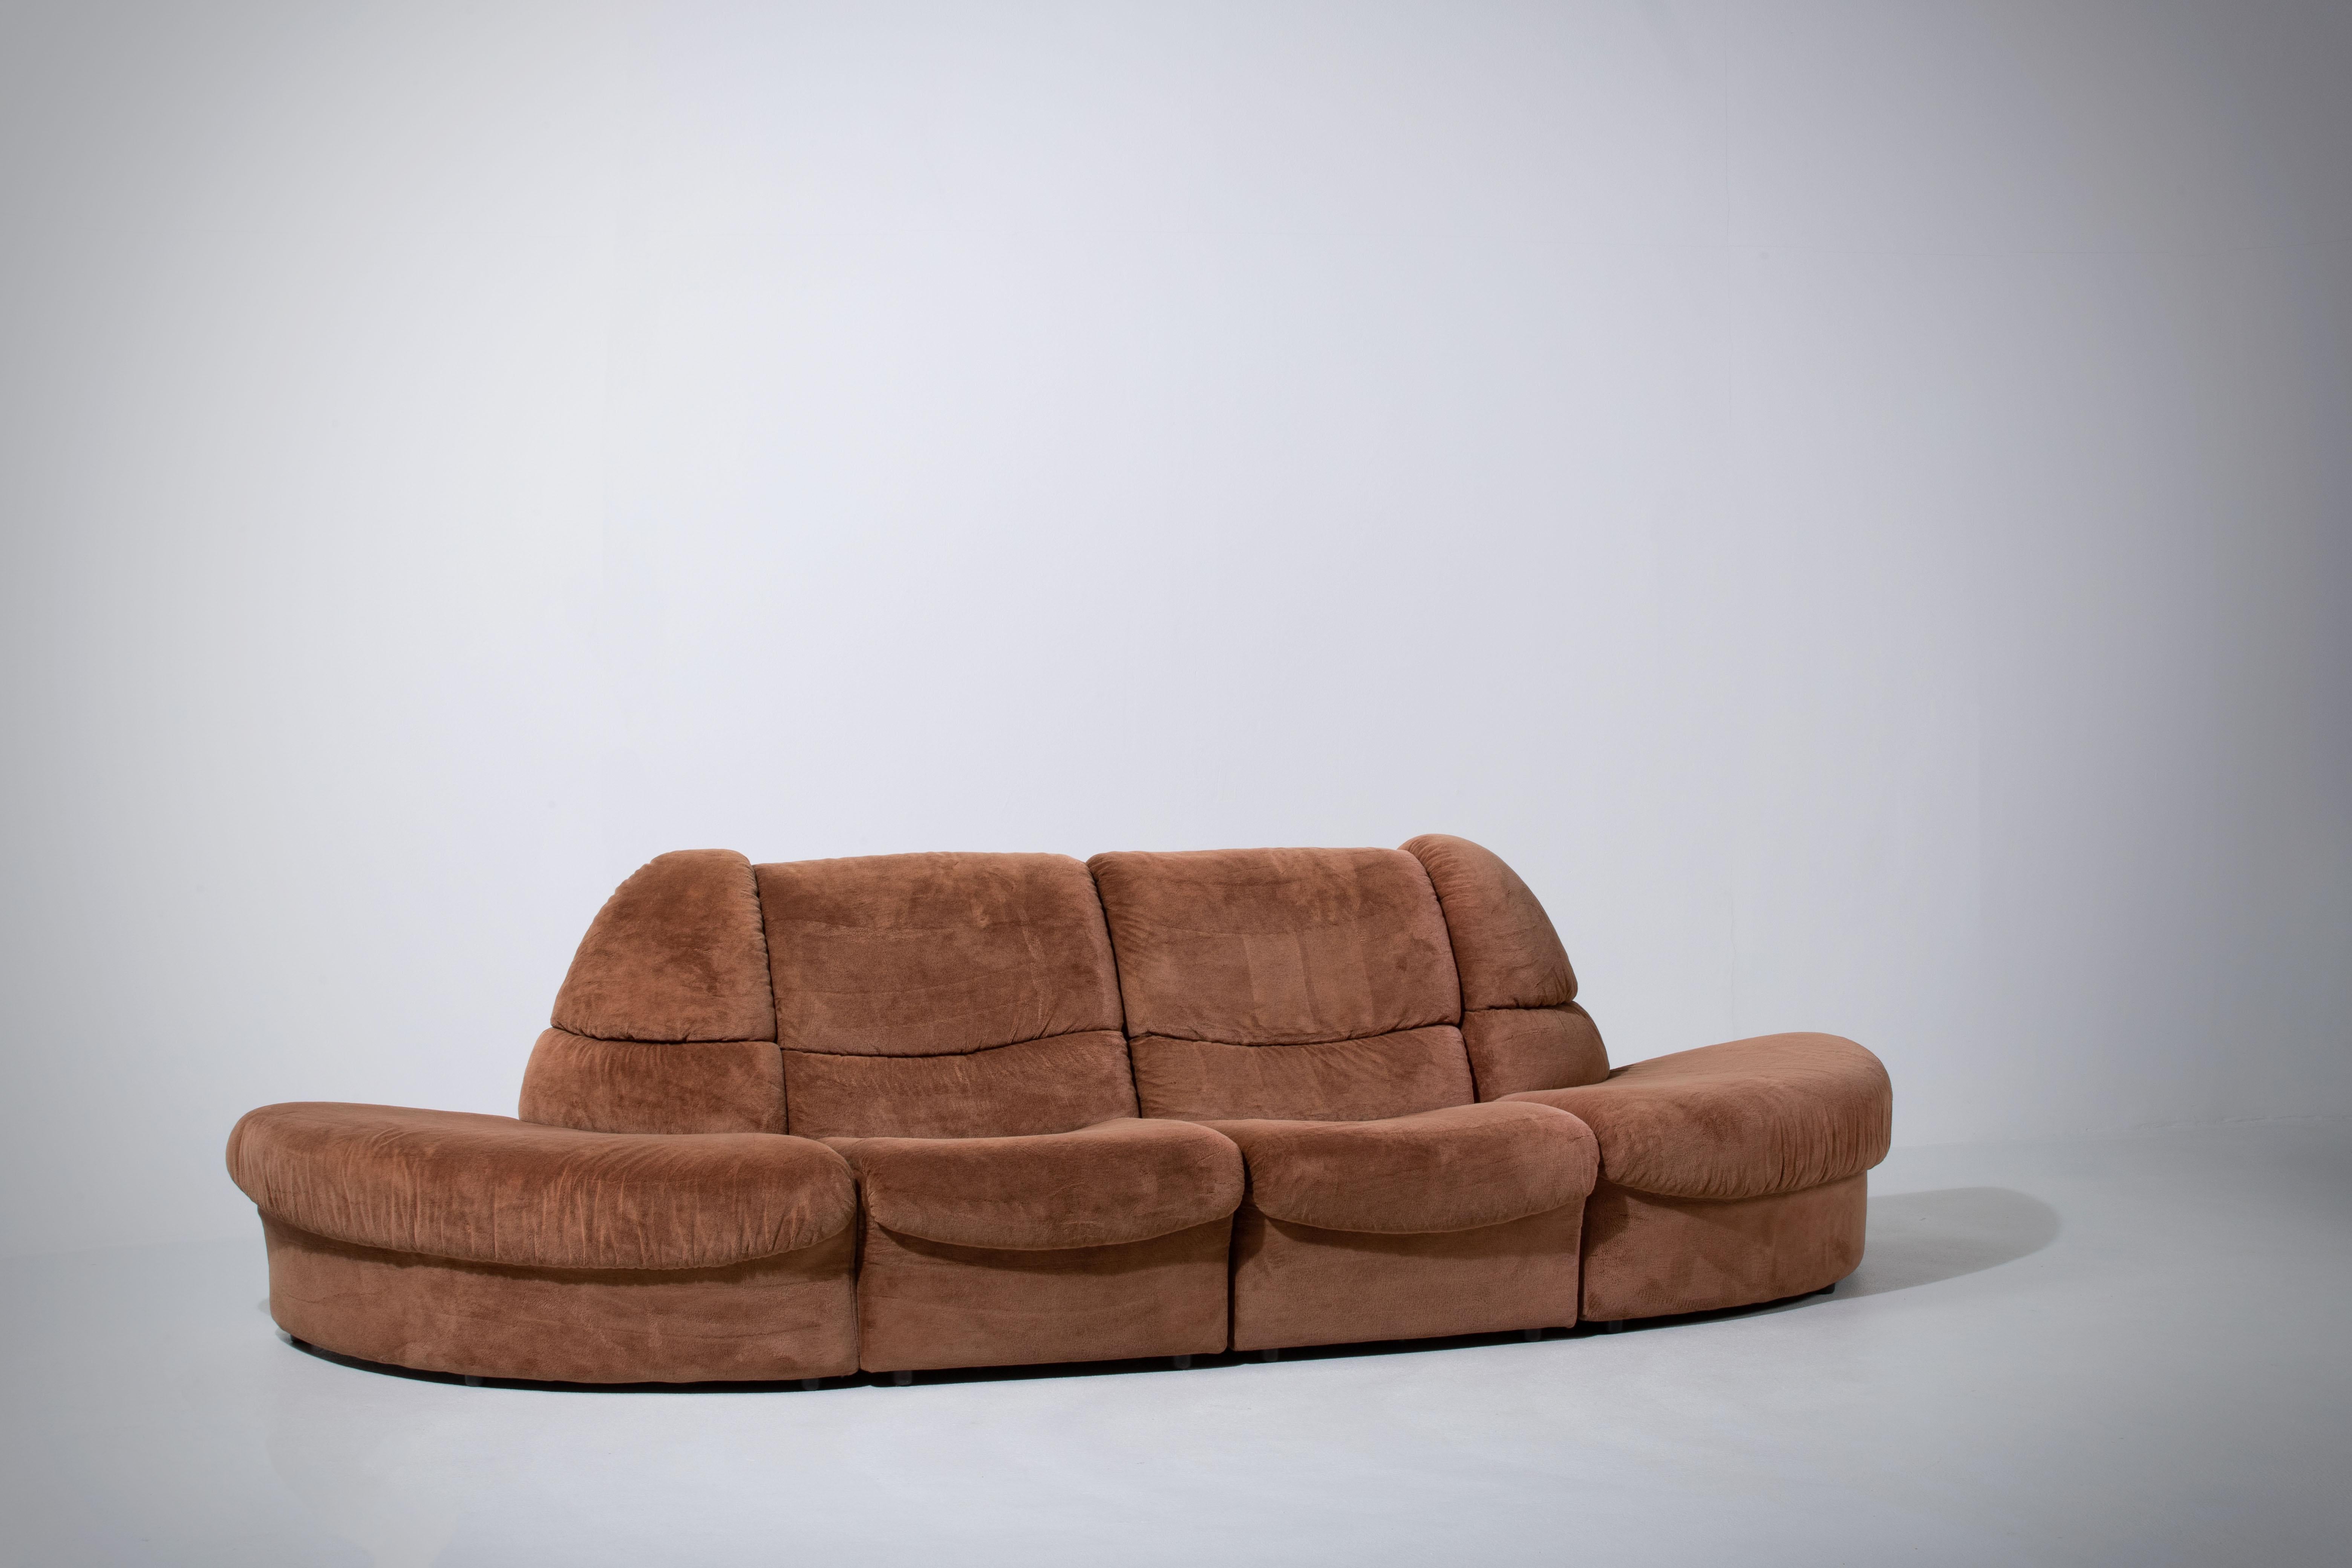 Mid-century modular sofa in a 70s velvet.
Consist of four sections with curved shapes.

Good vintage condition with minor wear.
 One element has a structural break on the base, see picture. This doesn't impact the element's stability.